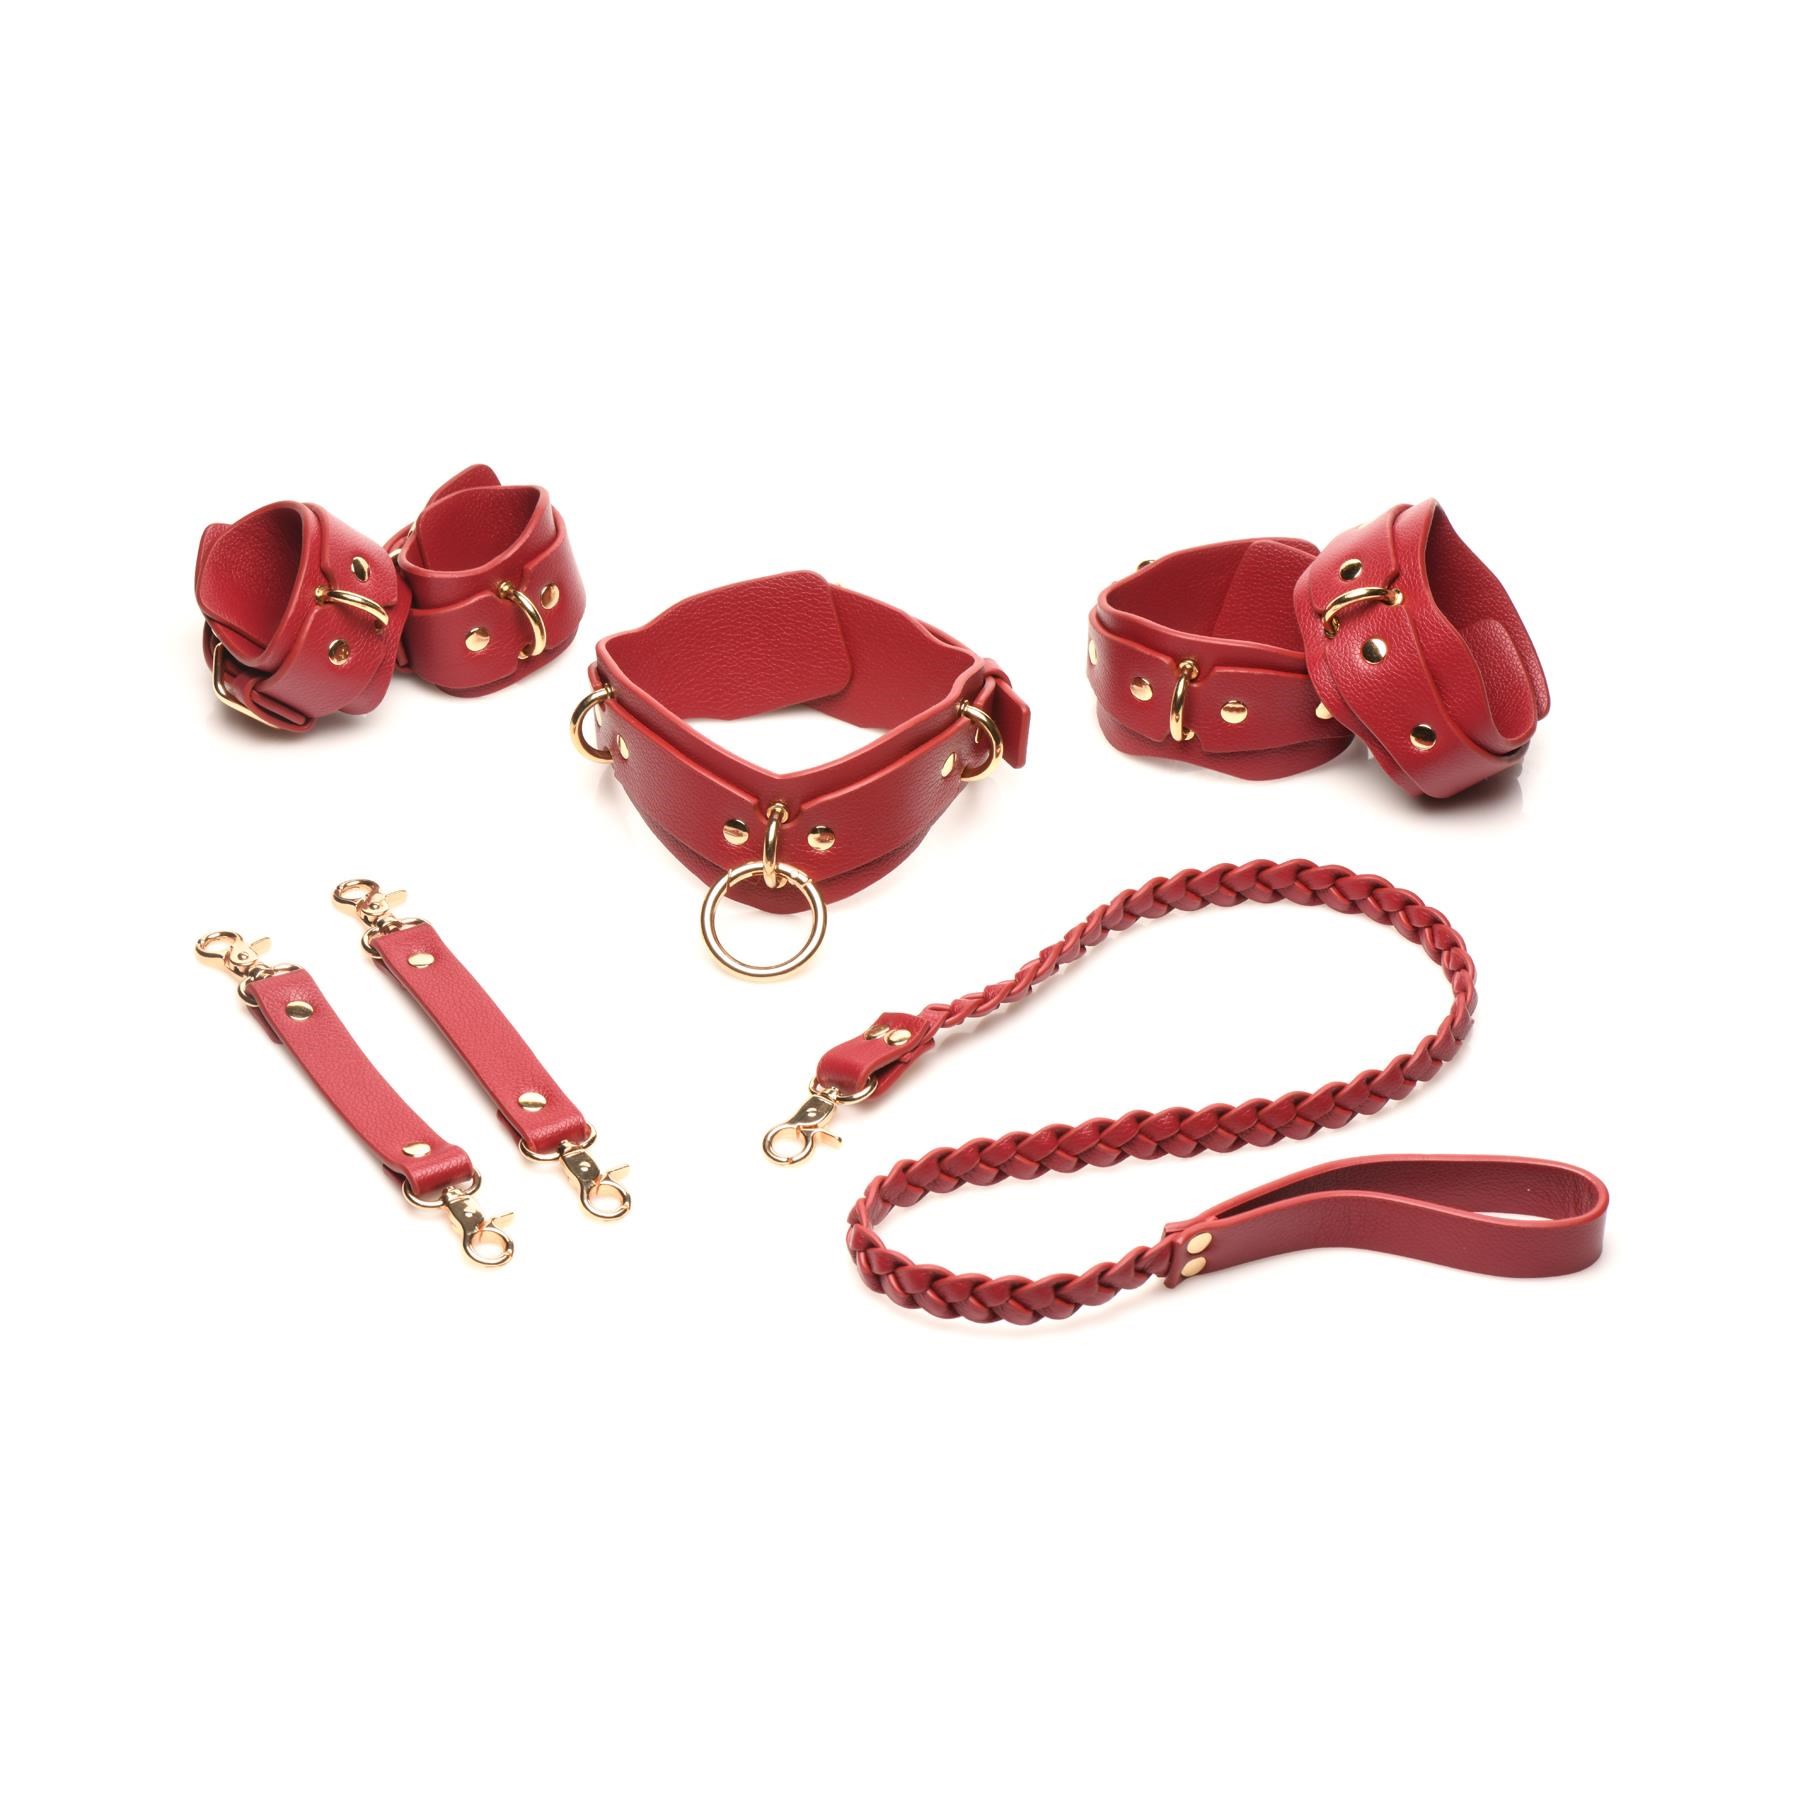 Bedroom Bliss Lover's Restraint Set - All Components